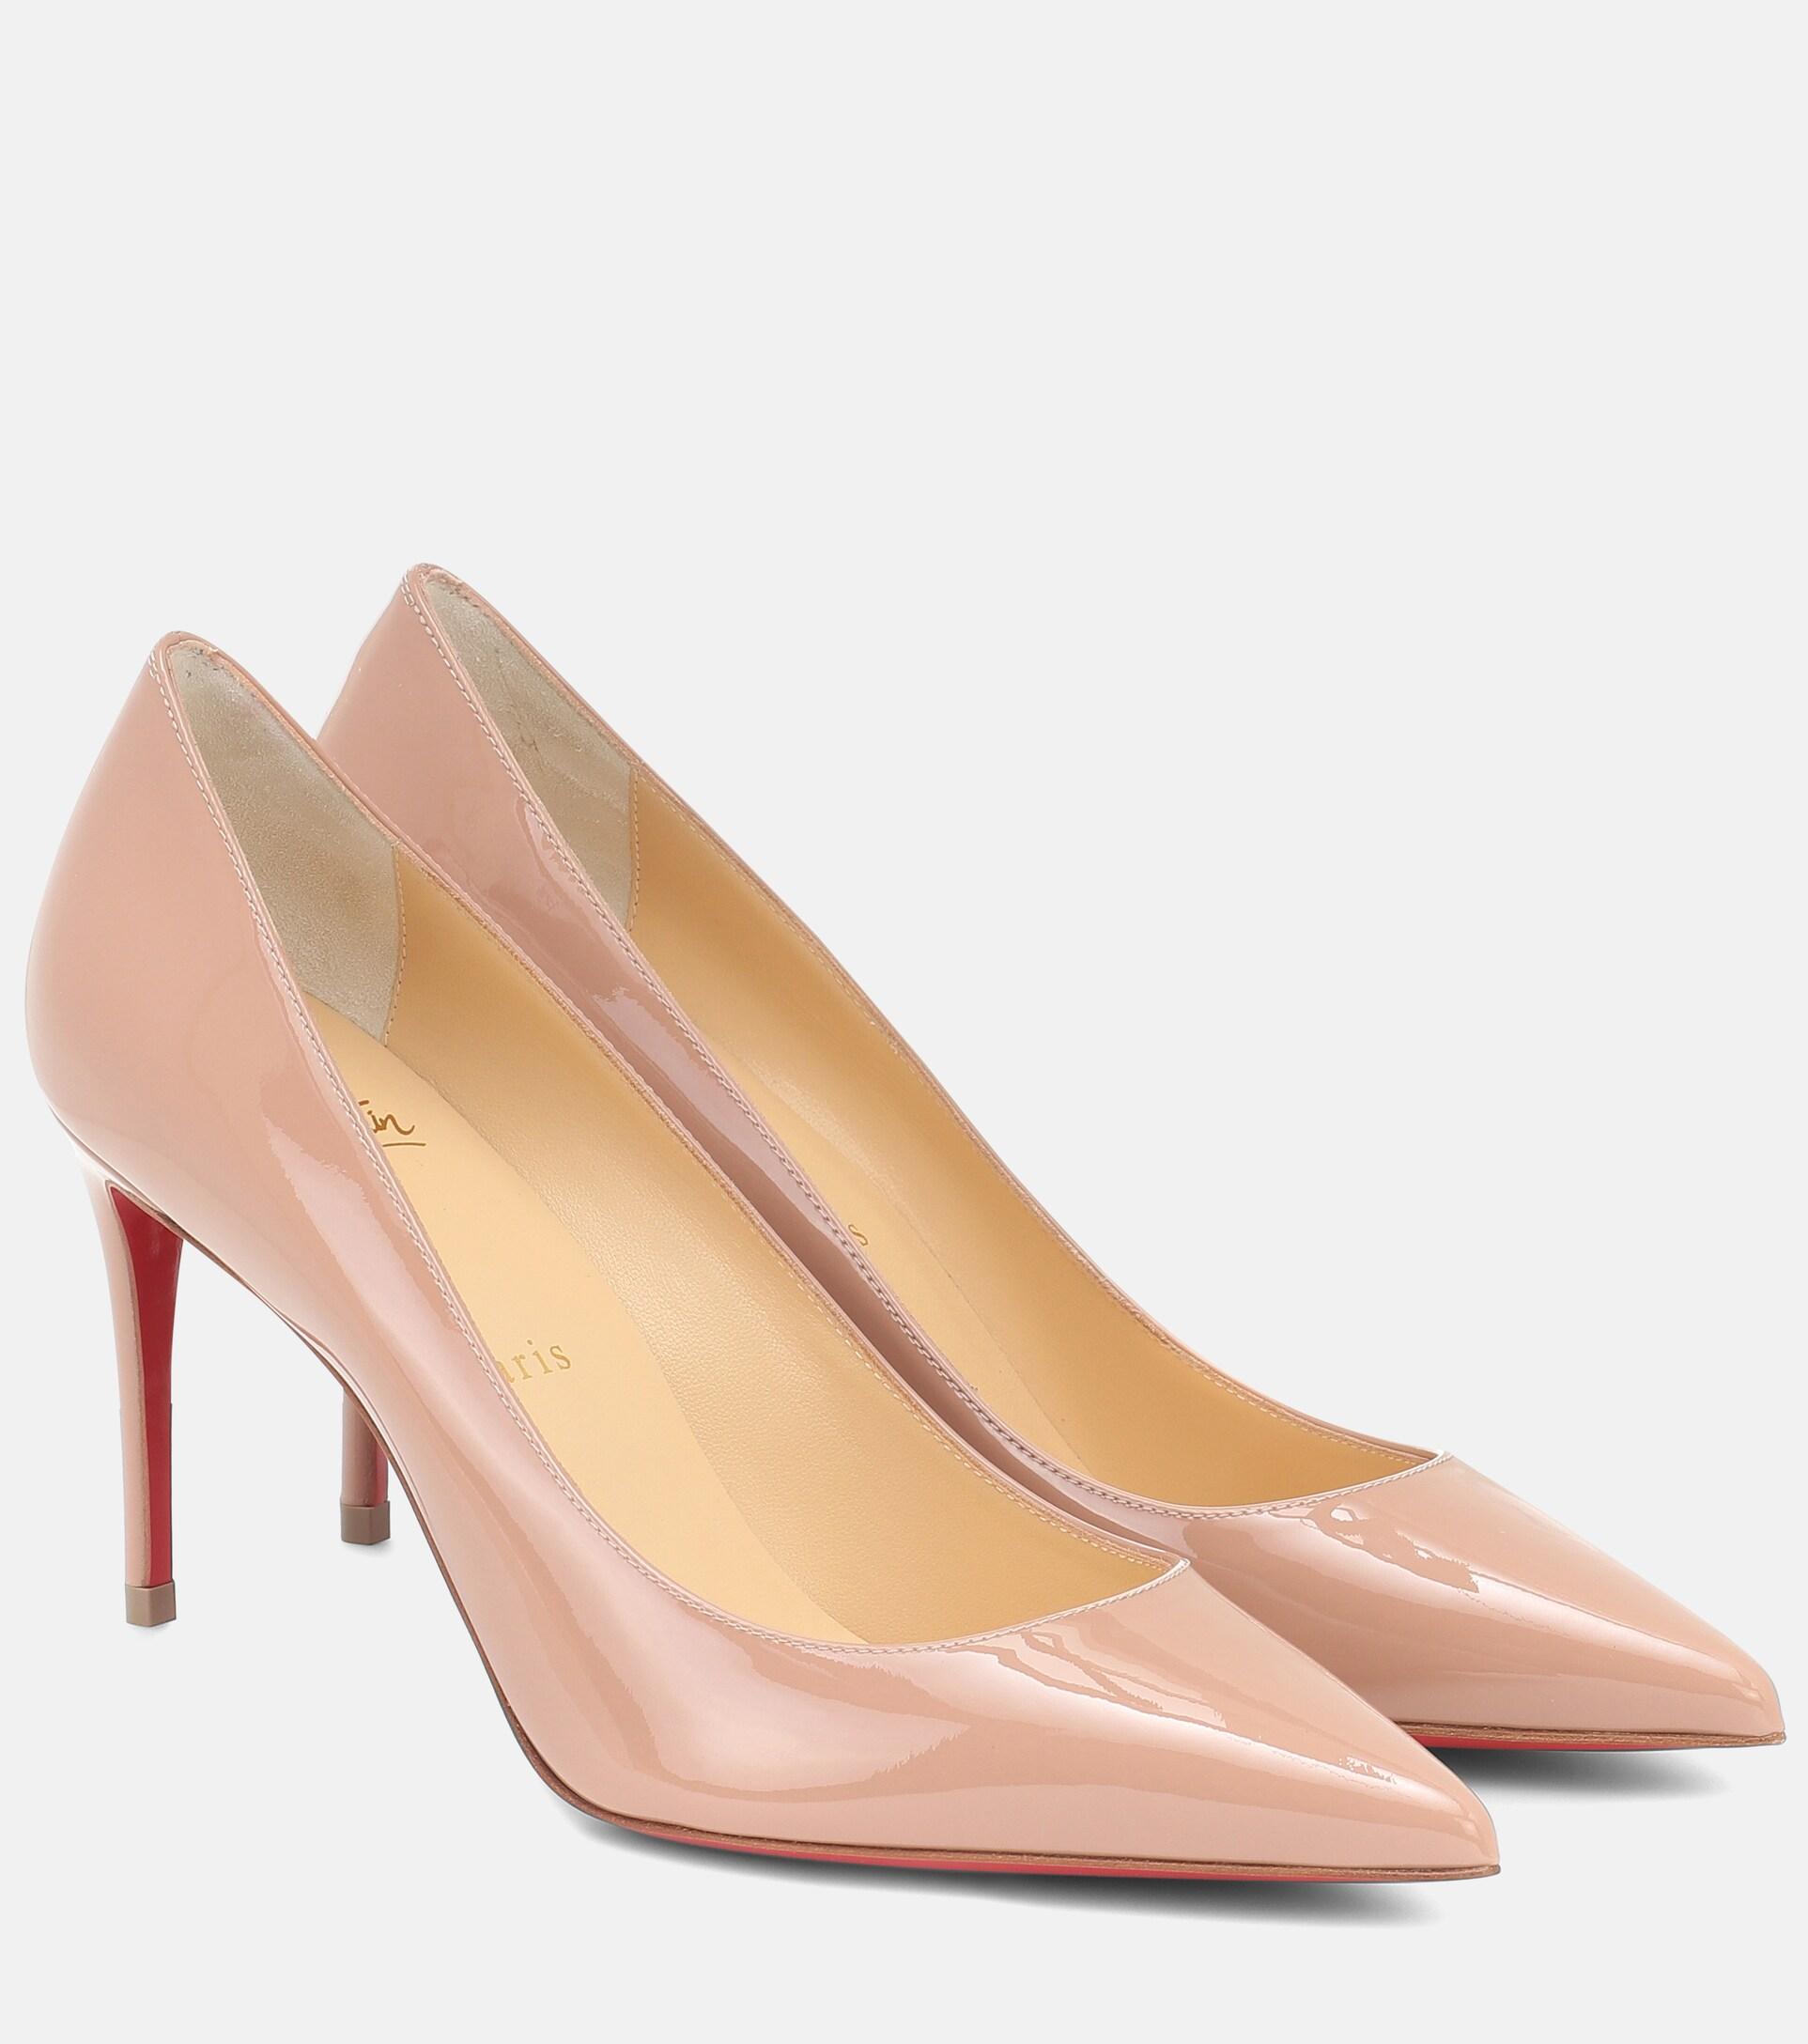 Christian Louboutin Kate 85 Patent Leather Pumps in Natural | Lyst